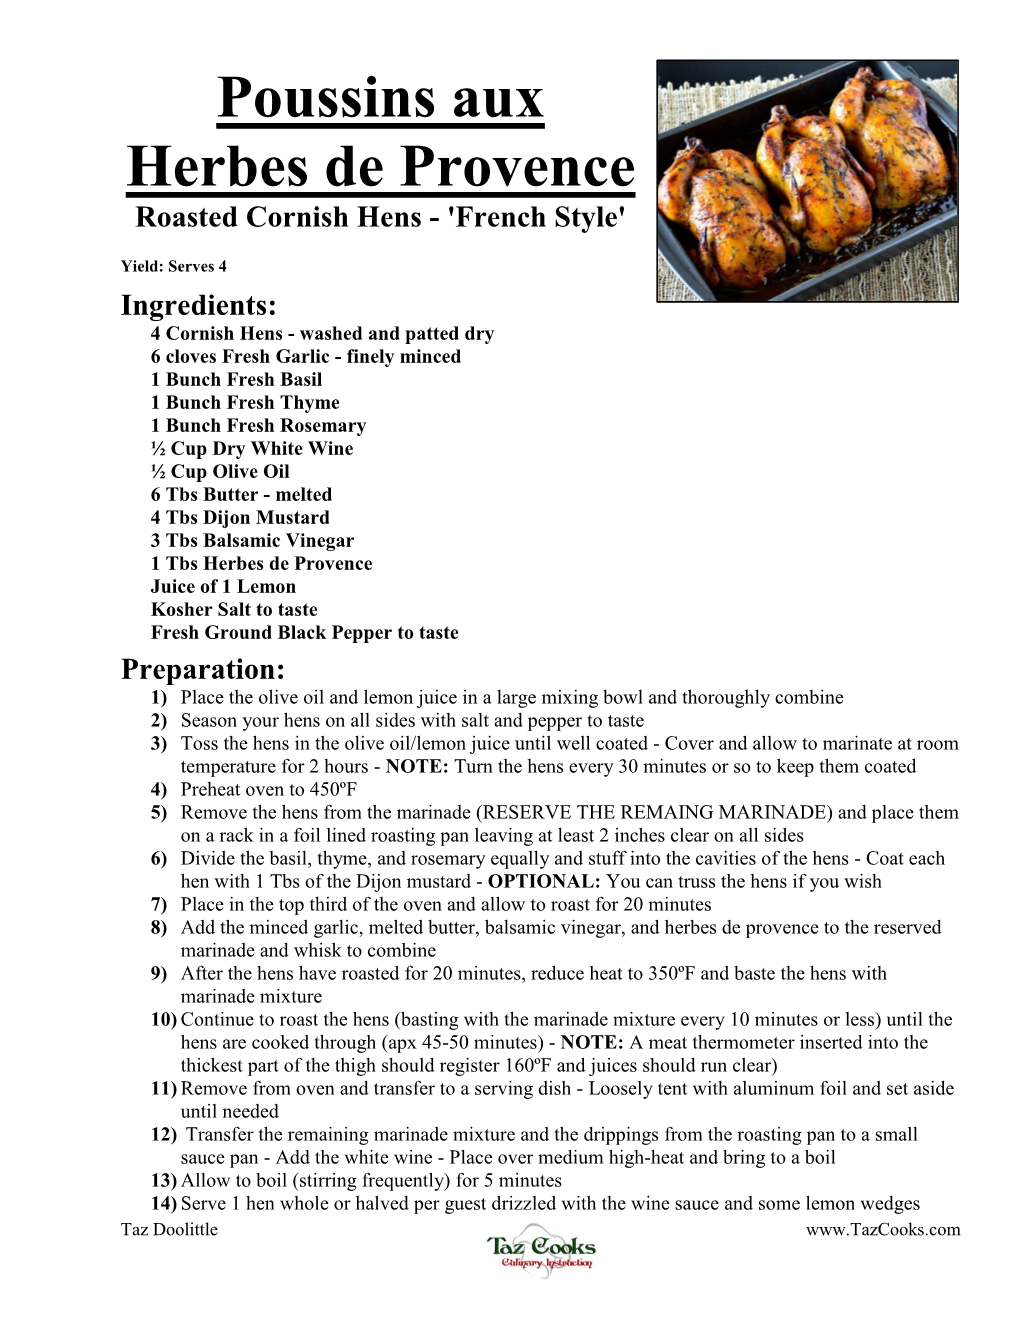 Poussins Aux Herbes De Provence Roasted Cornish Hens - 'French Style'